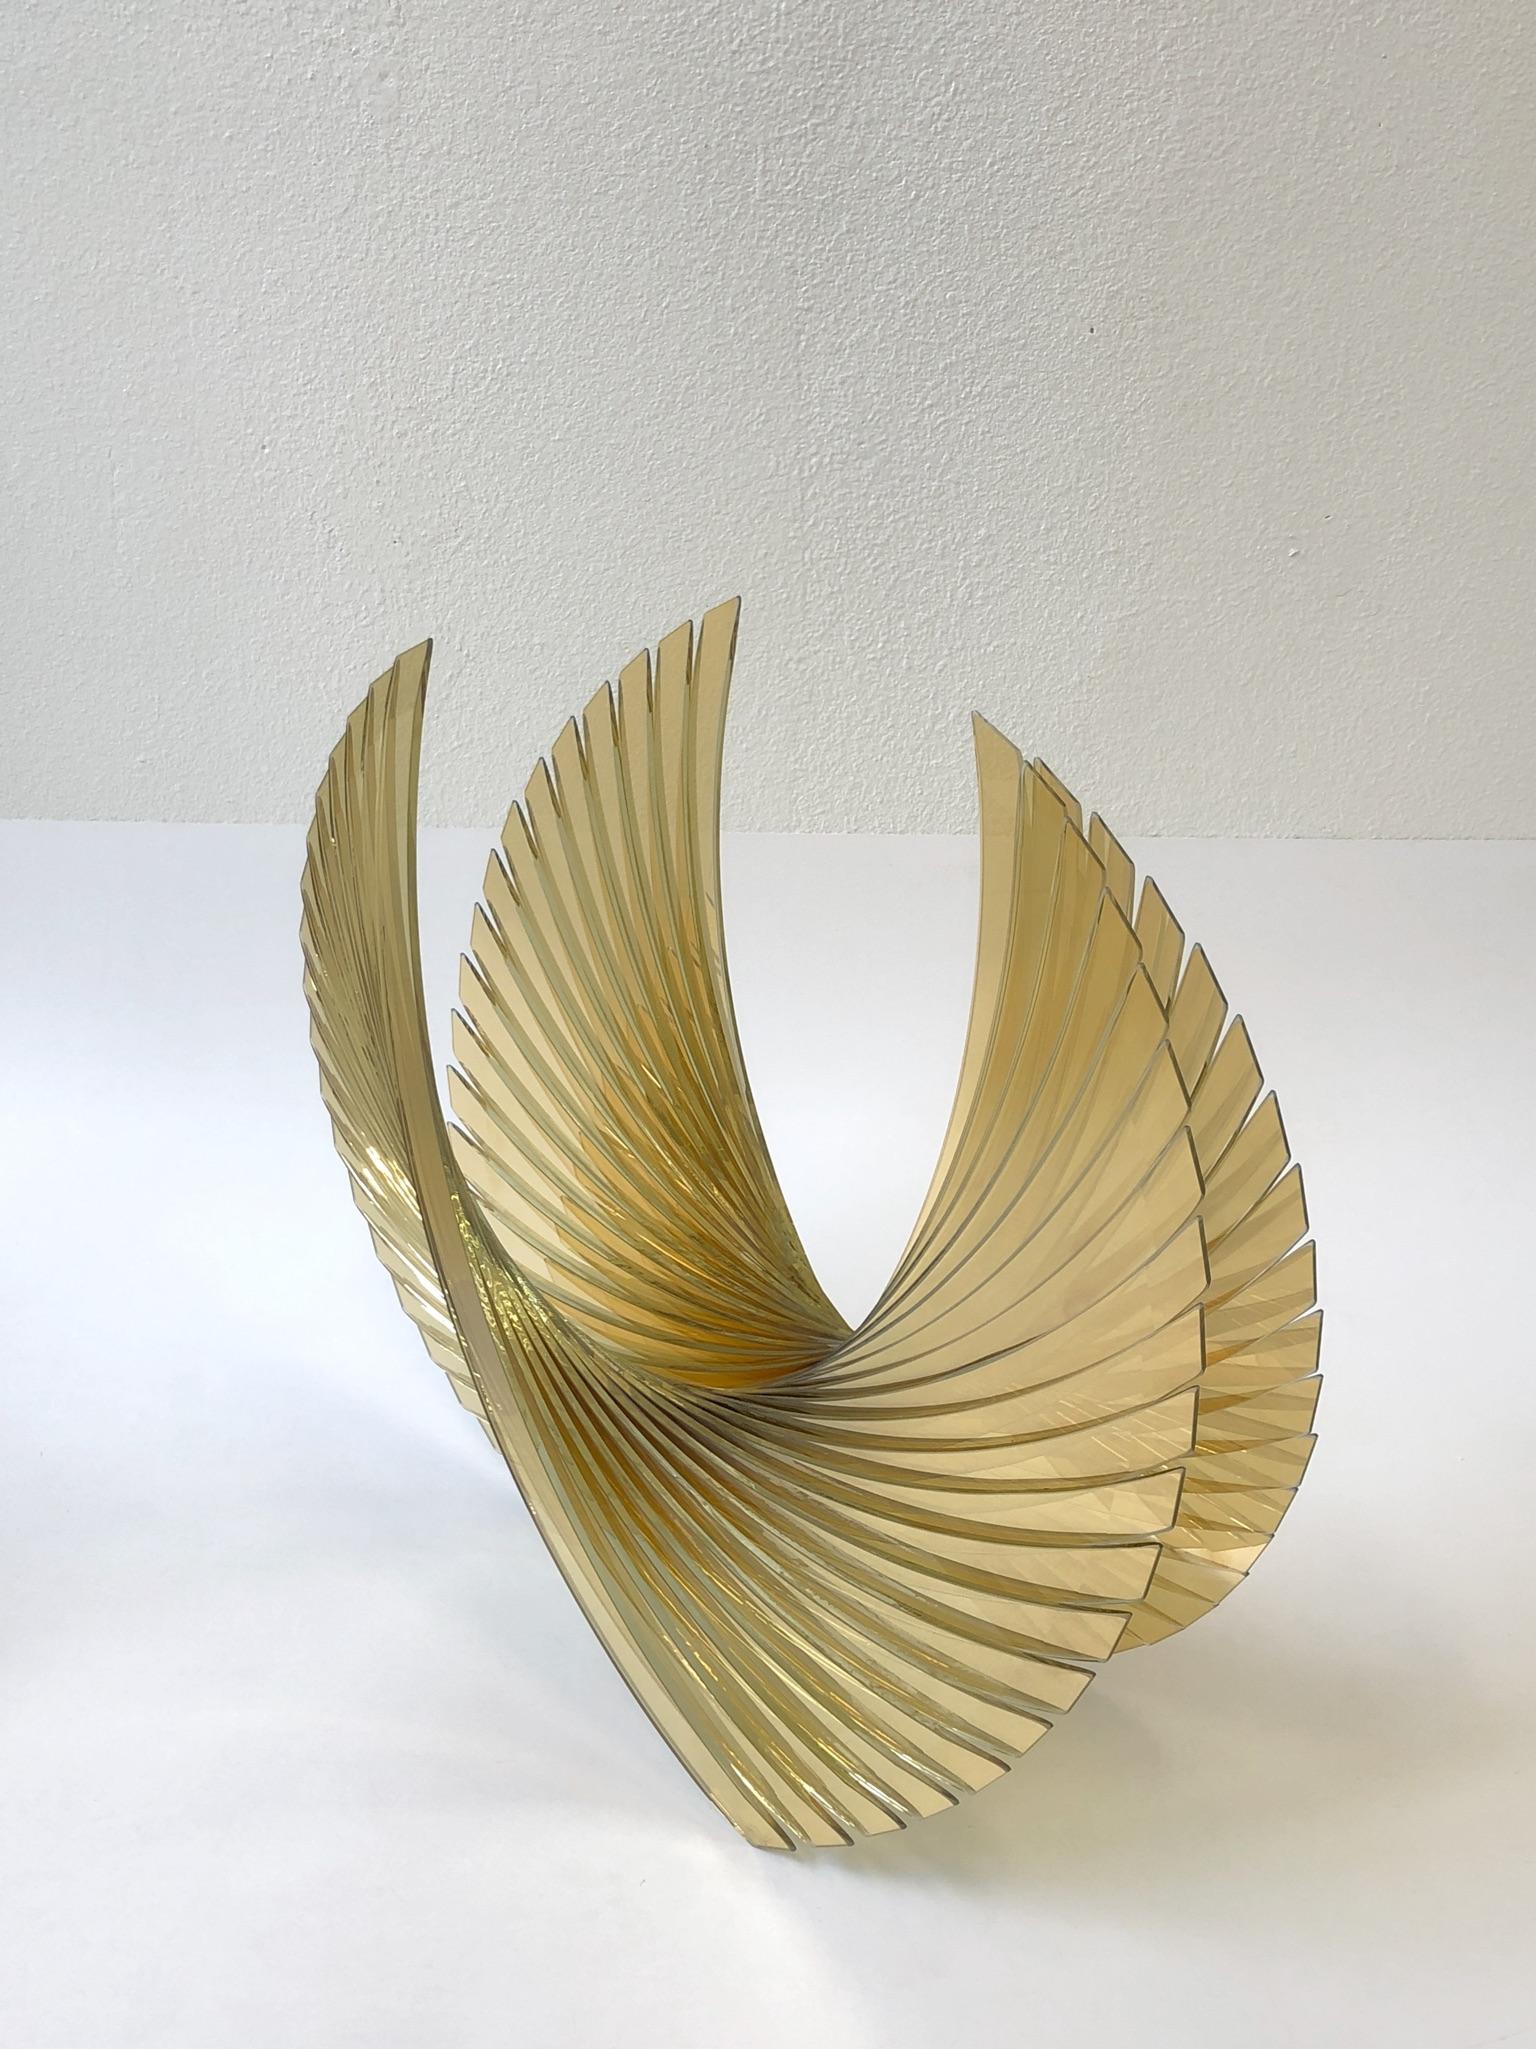 Contemporary Amber Glass Sculpture by Tom Marosz